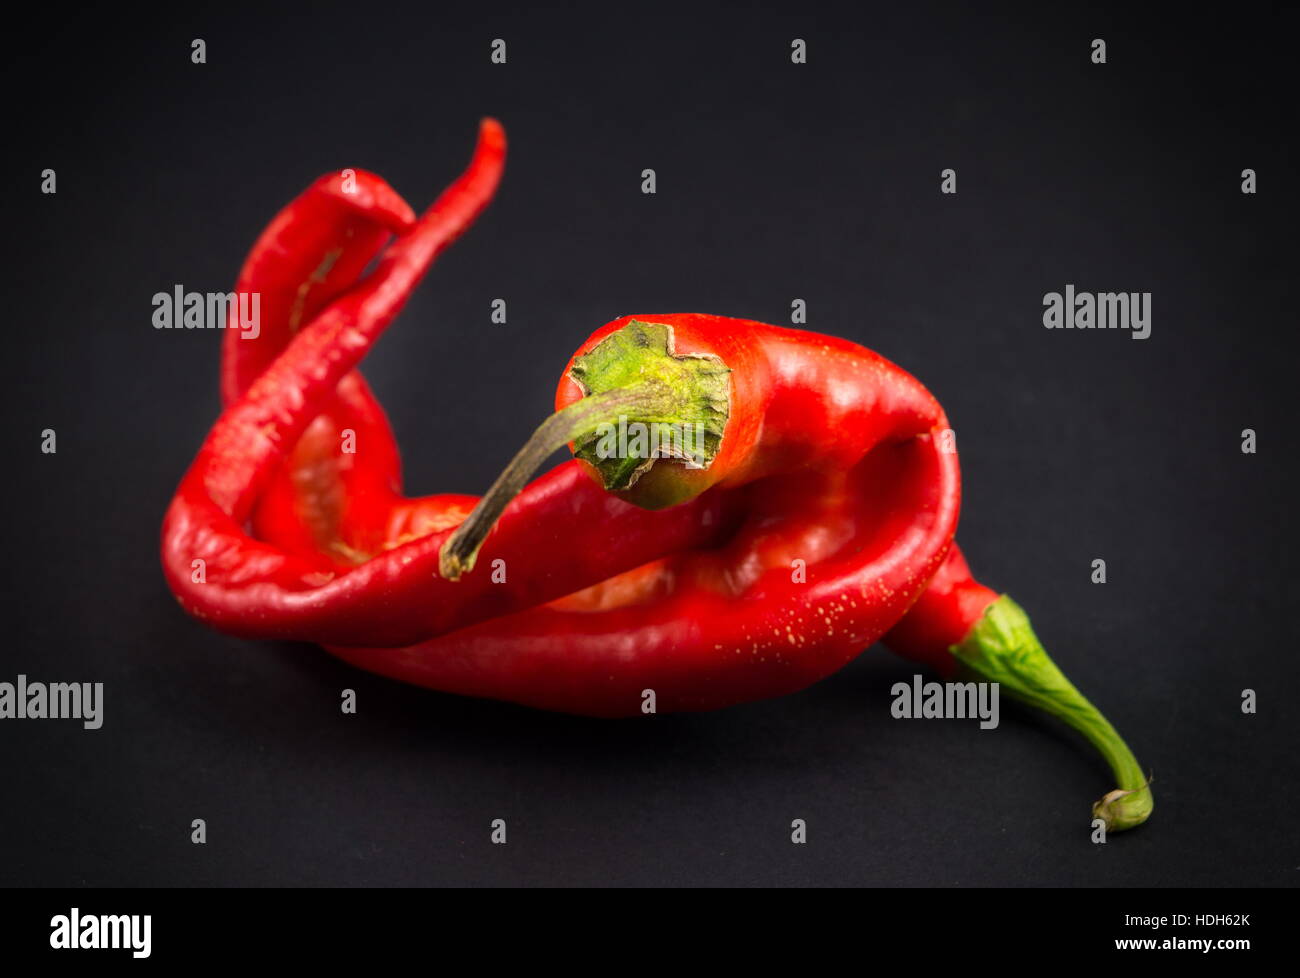 Red peppers on dark background with vignette Stock Photo